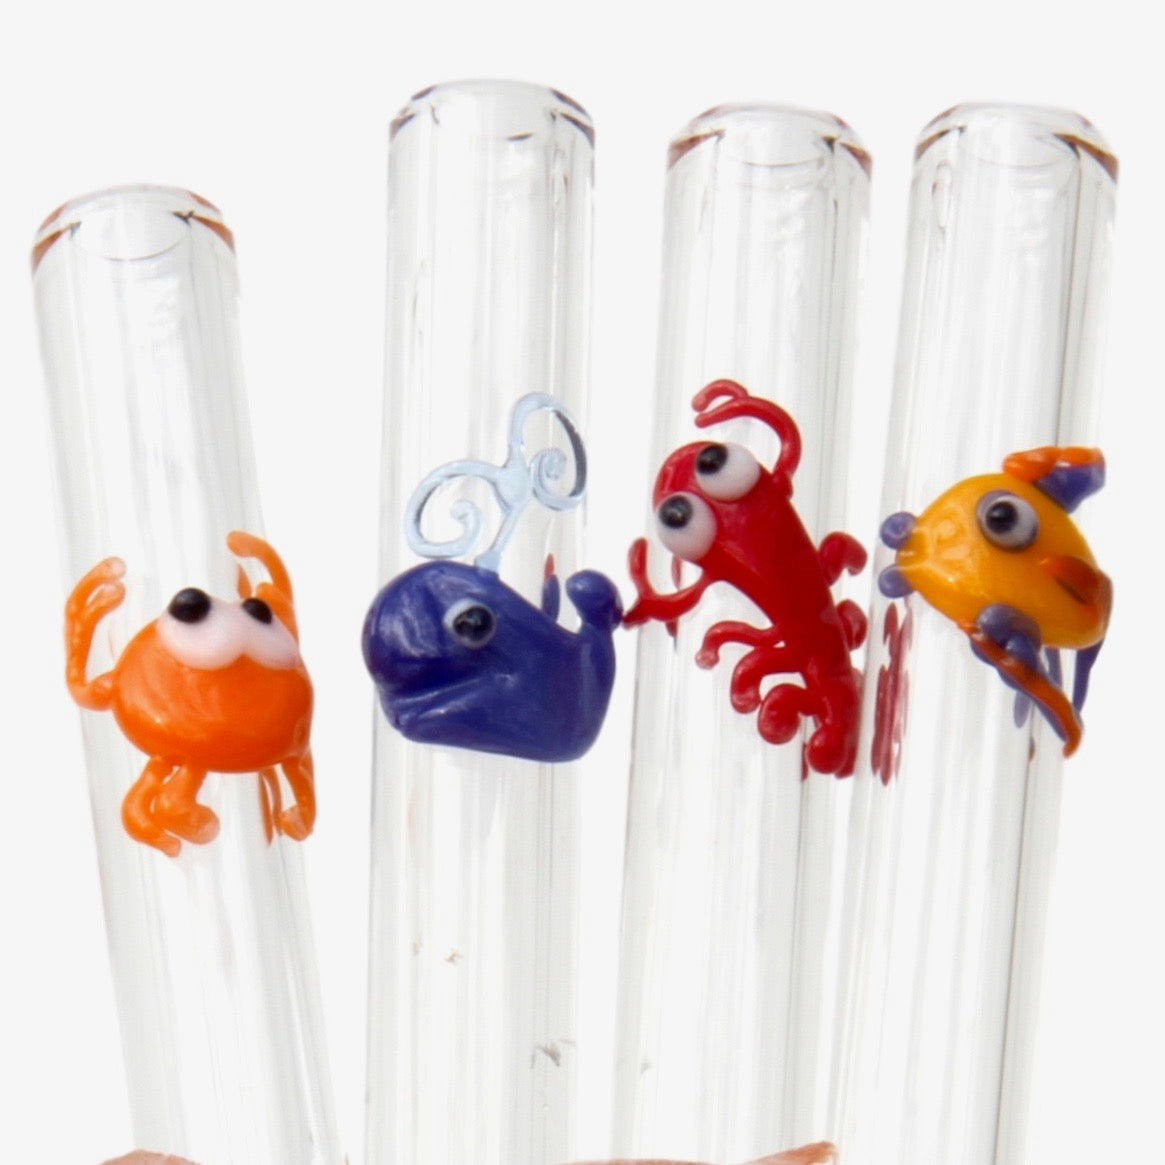 whale, lobster, crab and tropical fish glass drinking straws.